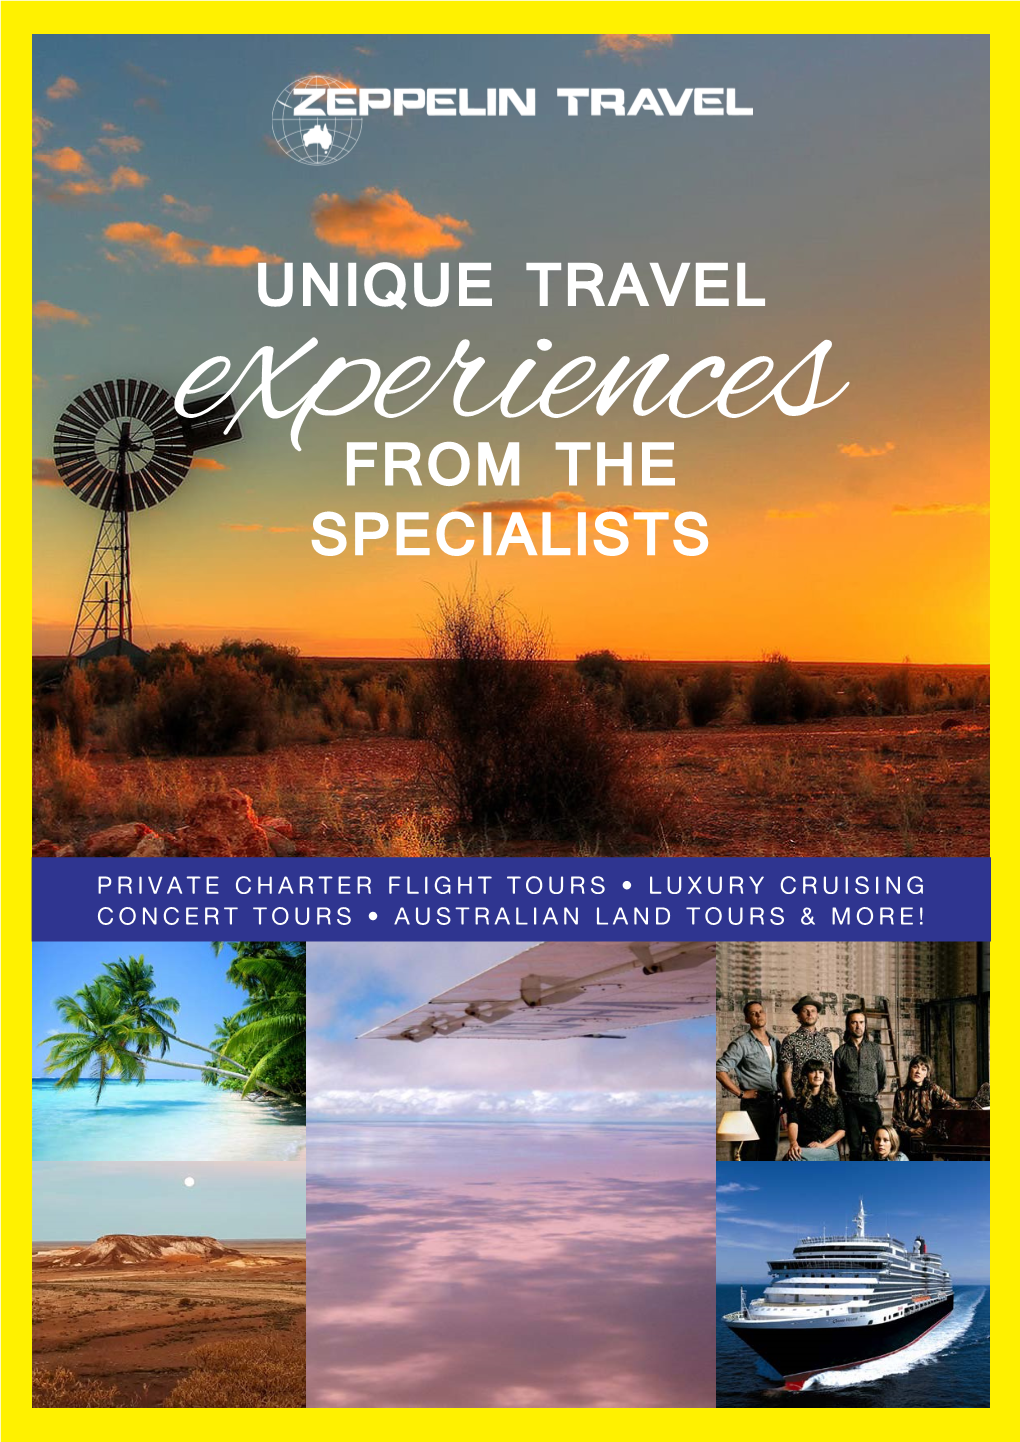 Unique Travel from the Specialists